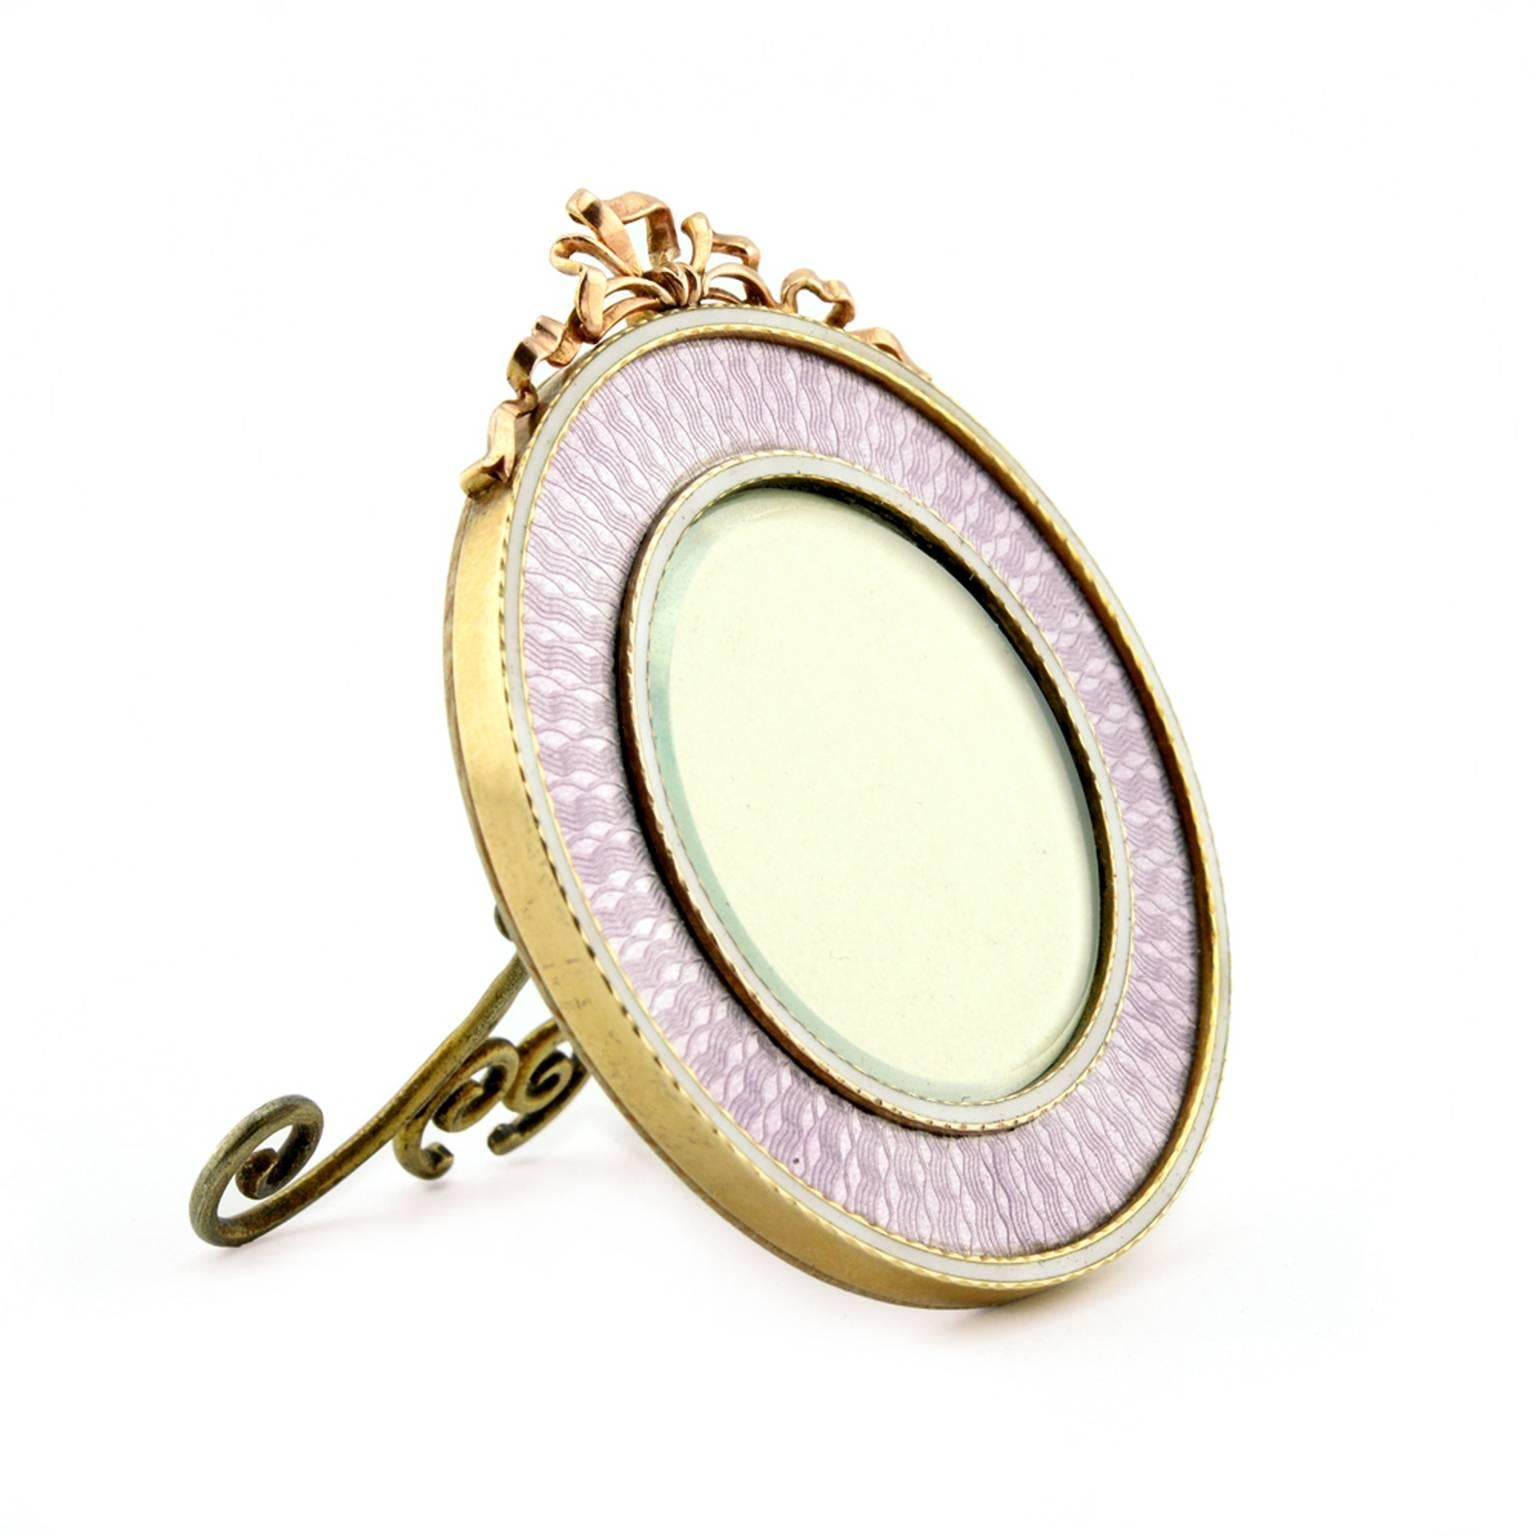 A Fabergé gold and mauve guilloché enamel photograph frame, Moscow, 1899-1908, with original Fabergé scratched inventory number 25205. Of circular form, enameled in translucent mauve enamel over a radiating engine-turned ground within a thin band of